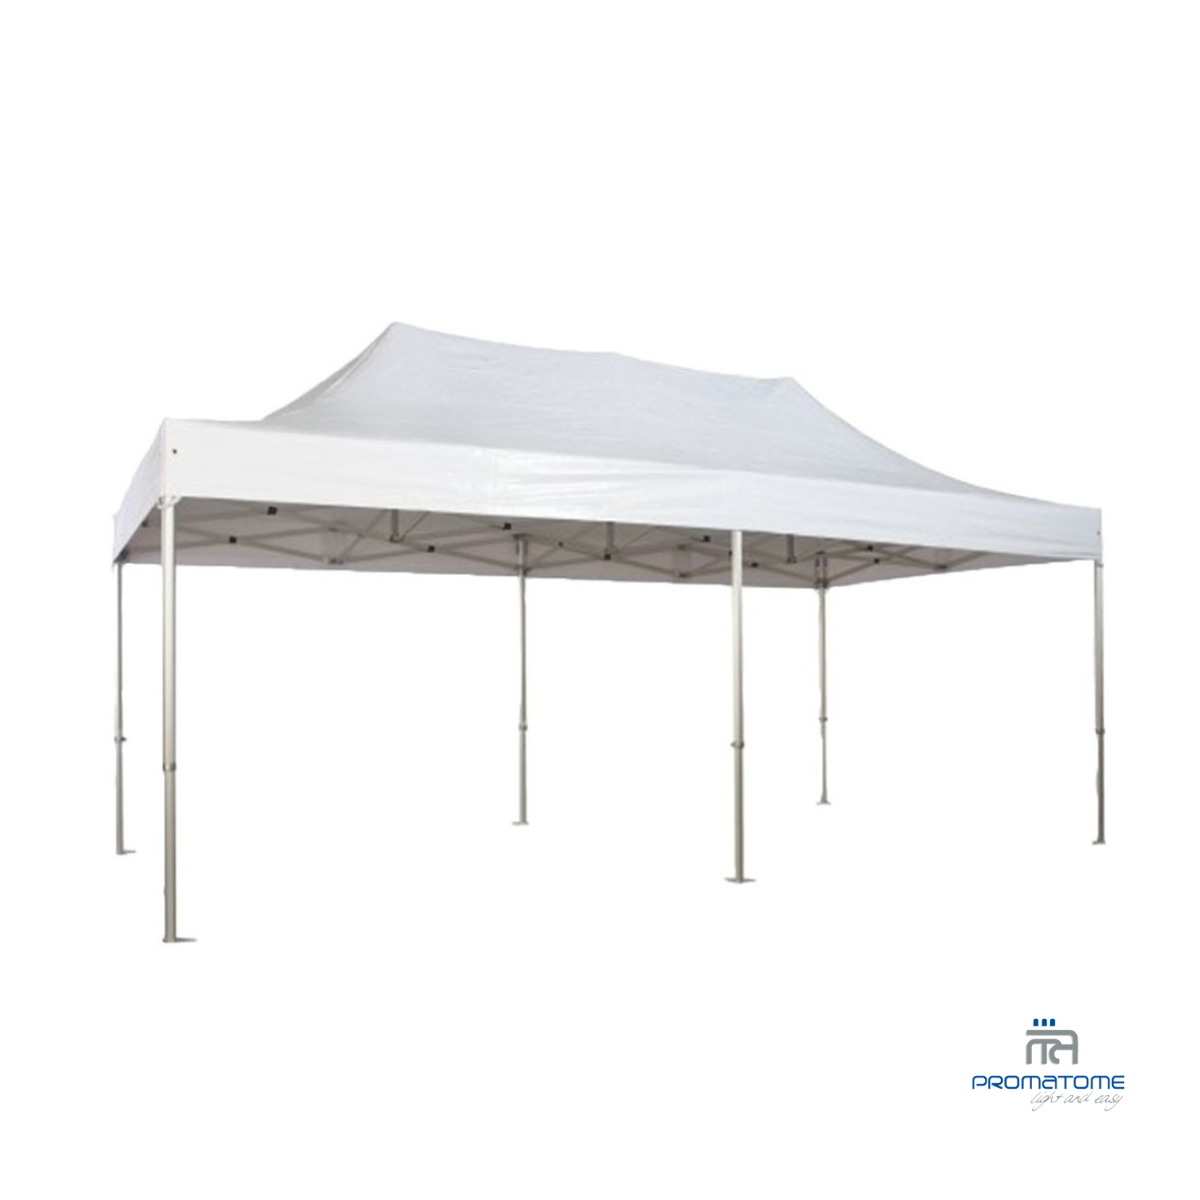 Vouwbare partytent Promastrong 3x6m